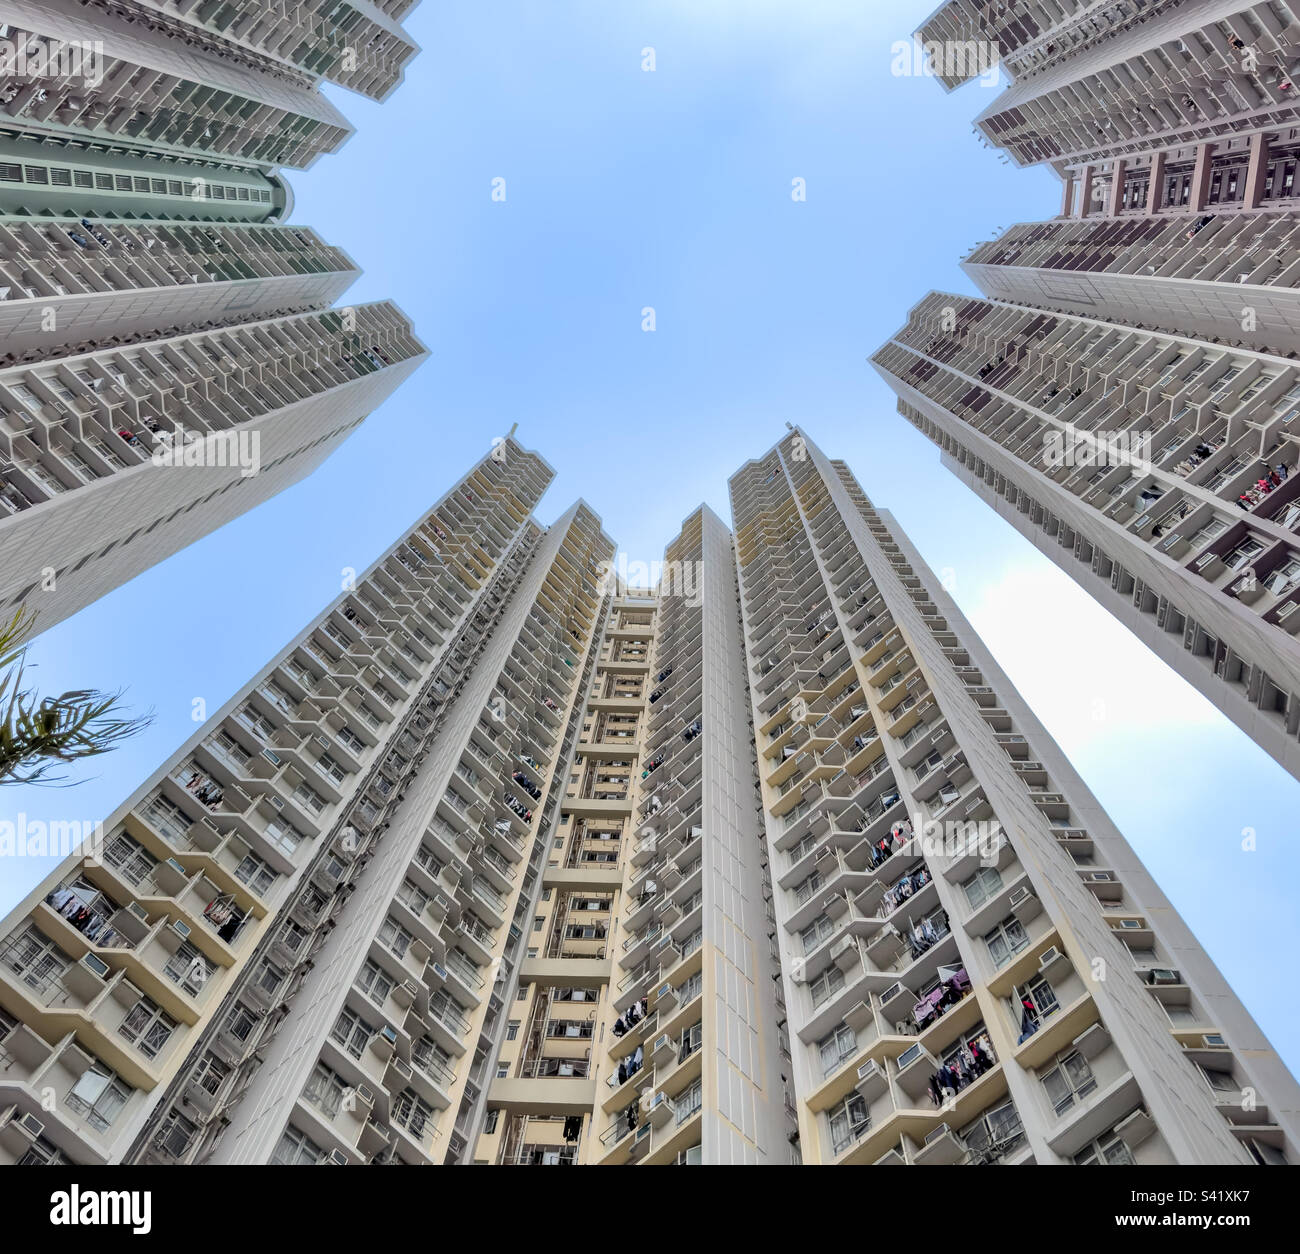 Residential towers in Kowloon, Hong Kong Stock Photo